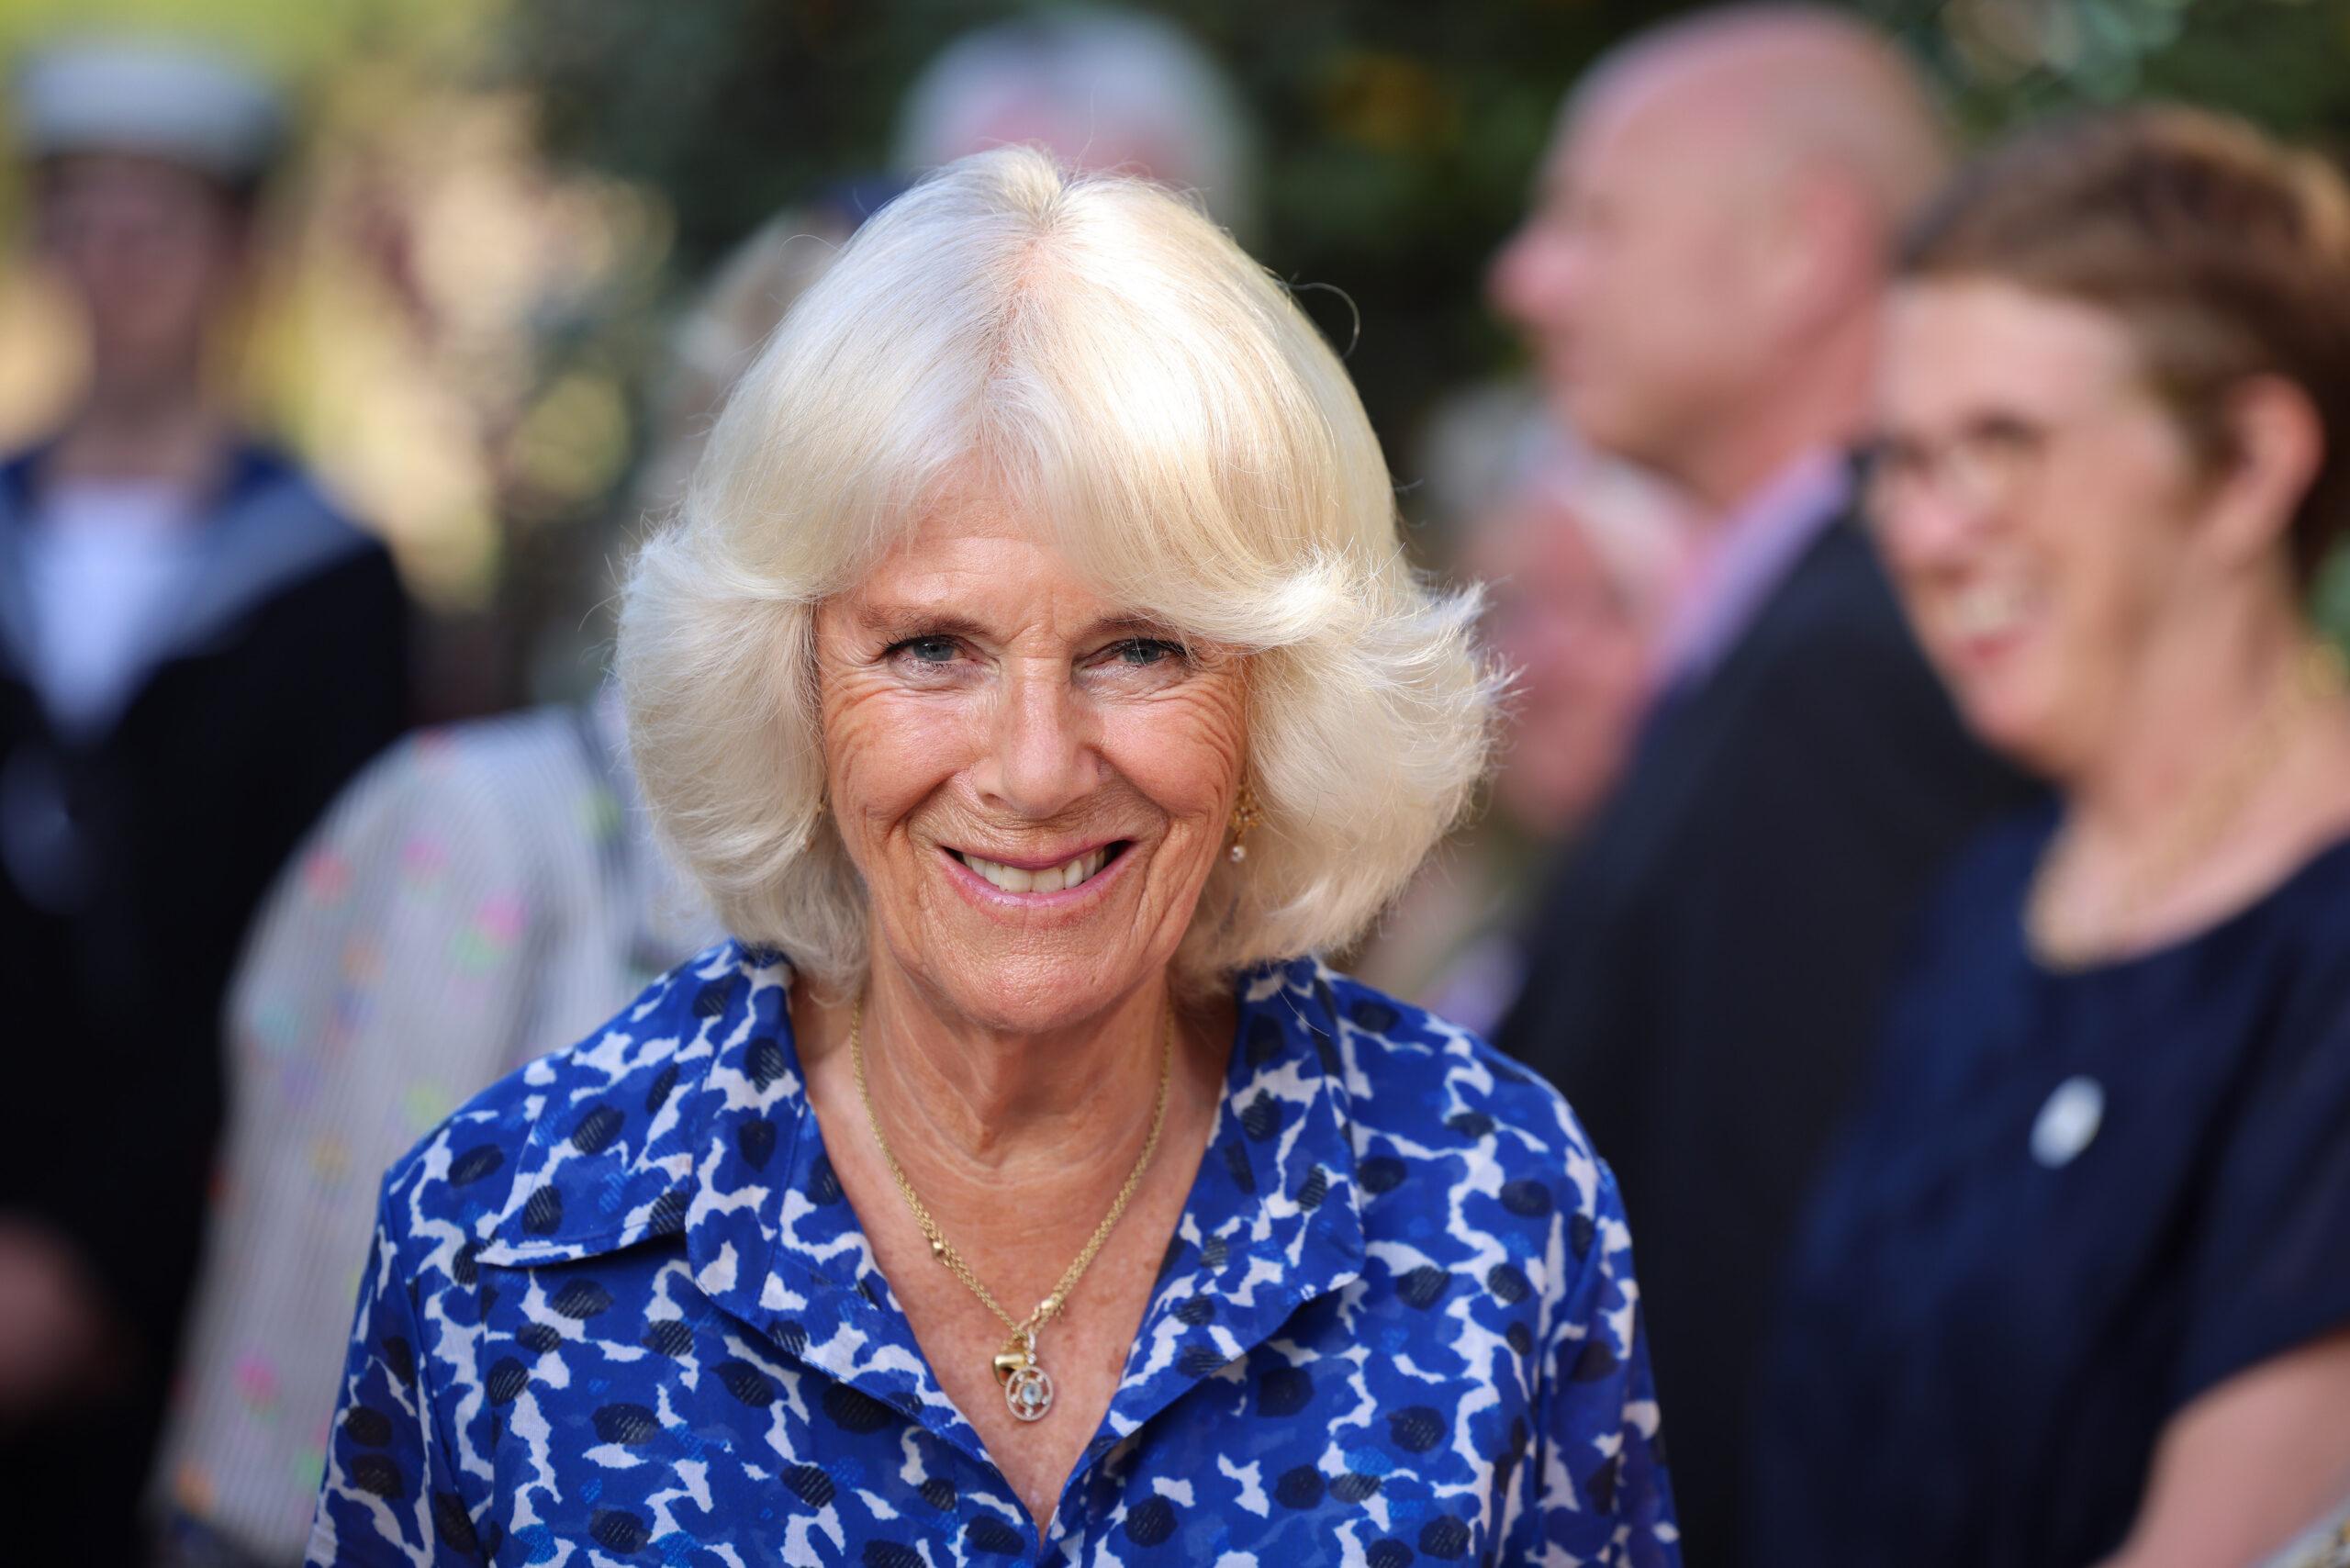 On the evening of Monday July 19, the Duke and Duchess of Cornwall, Prince Charles and Camilla, attend a reception at Duchy of Cornwall Nursery, Lostwithiel, to celebrate the launch of The Prince's Countryside Fund's Confident Rural Communities Network Picture shows Duchess of Cornwall, Camilla Parker Bowles.